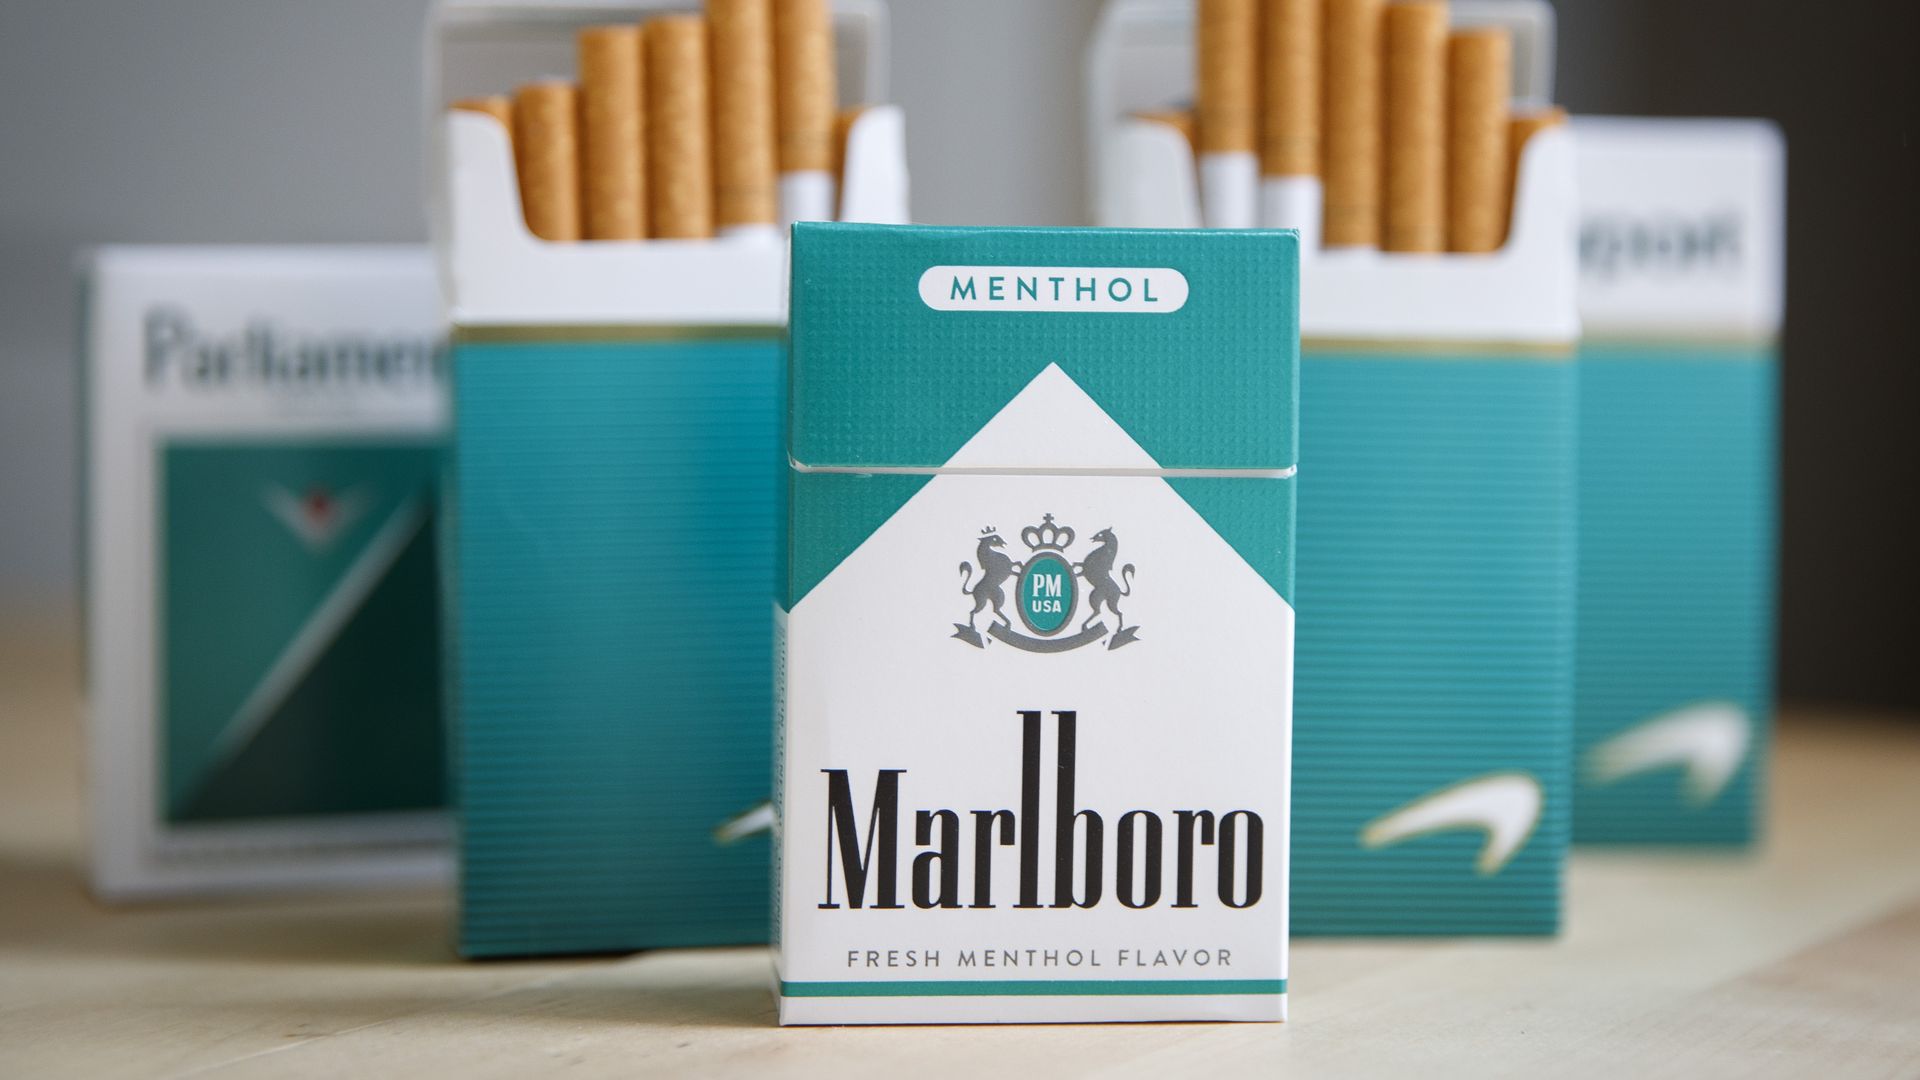 Picture of five blue Marlboro boxes containing menthol cigarettes